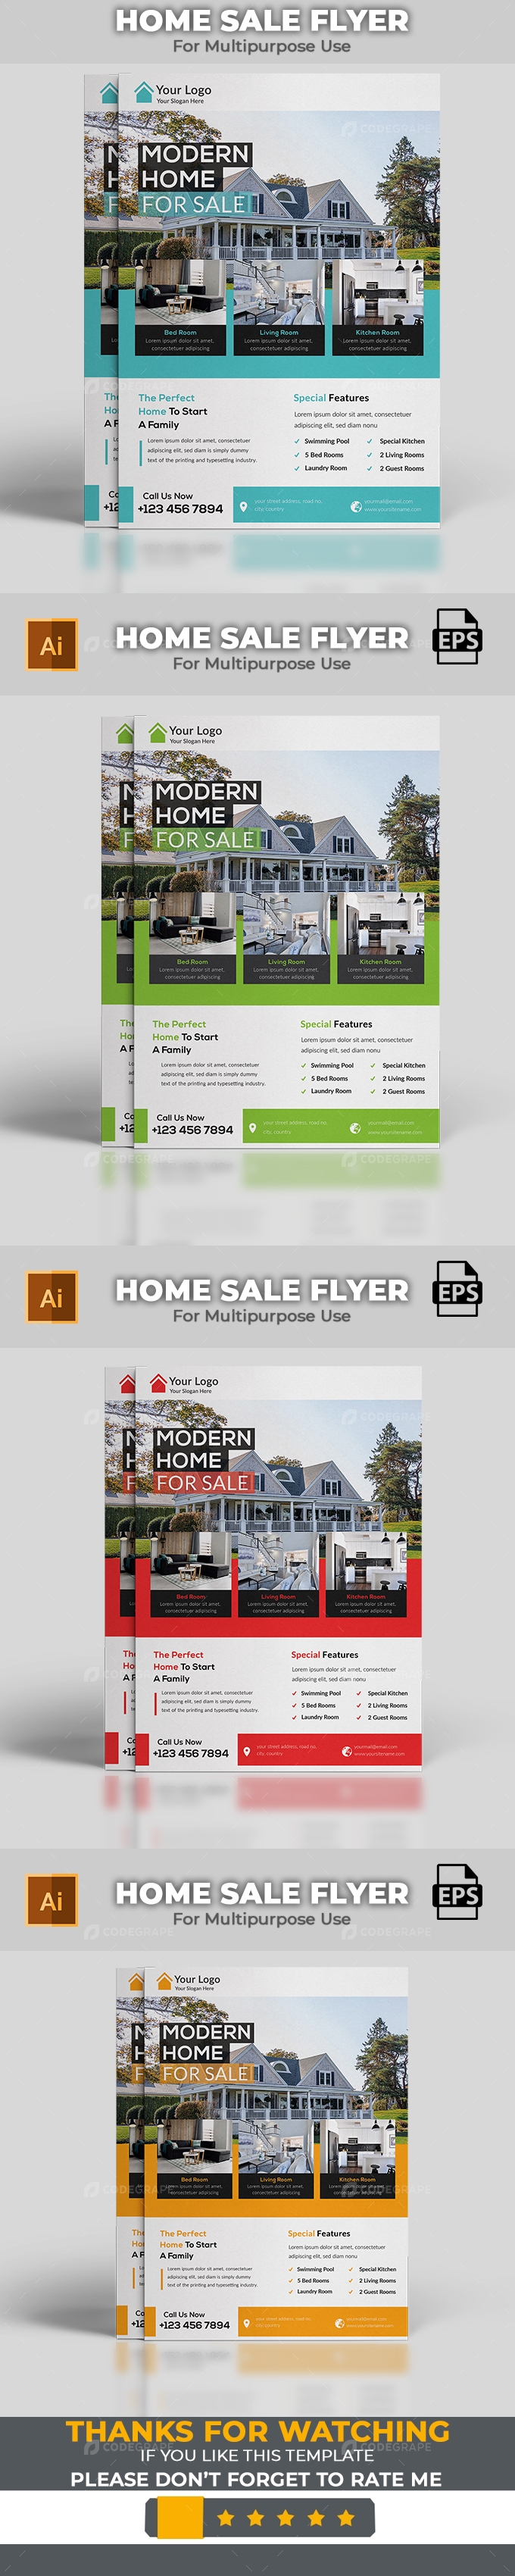 Home Sale Flyer